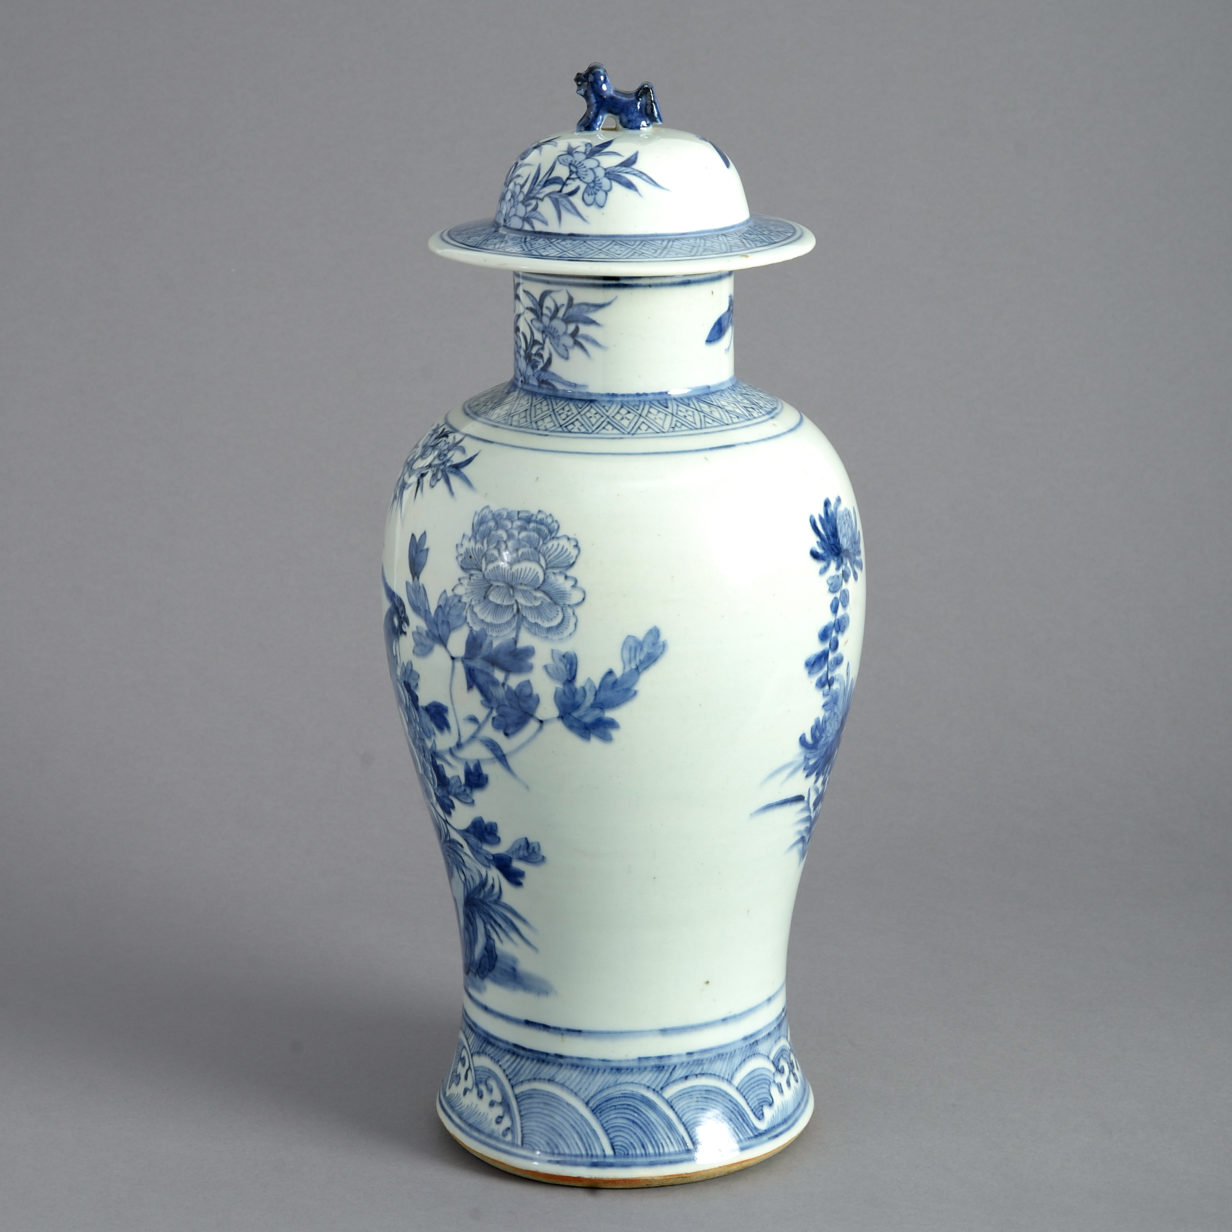 19th century blue & white porcelain vase and cover